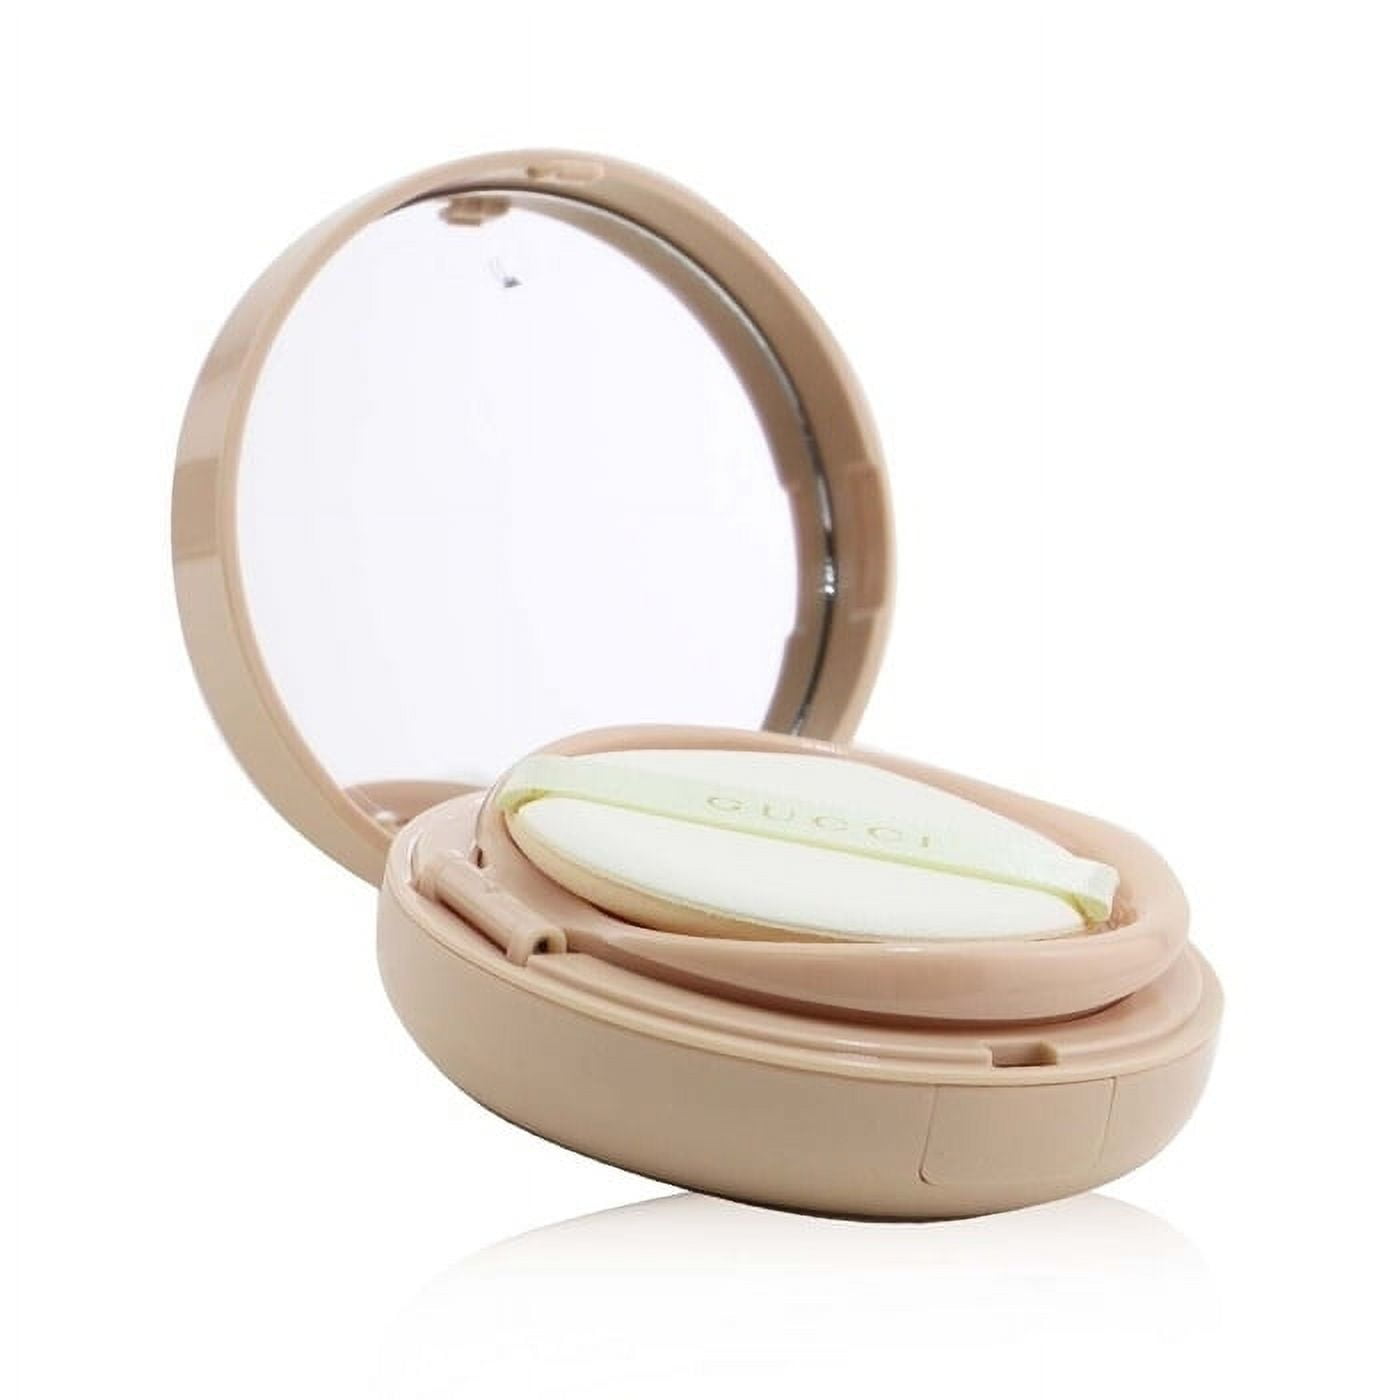 Authentic gucci compact mirror By GUCCI Beauty